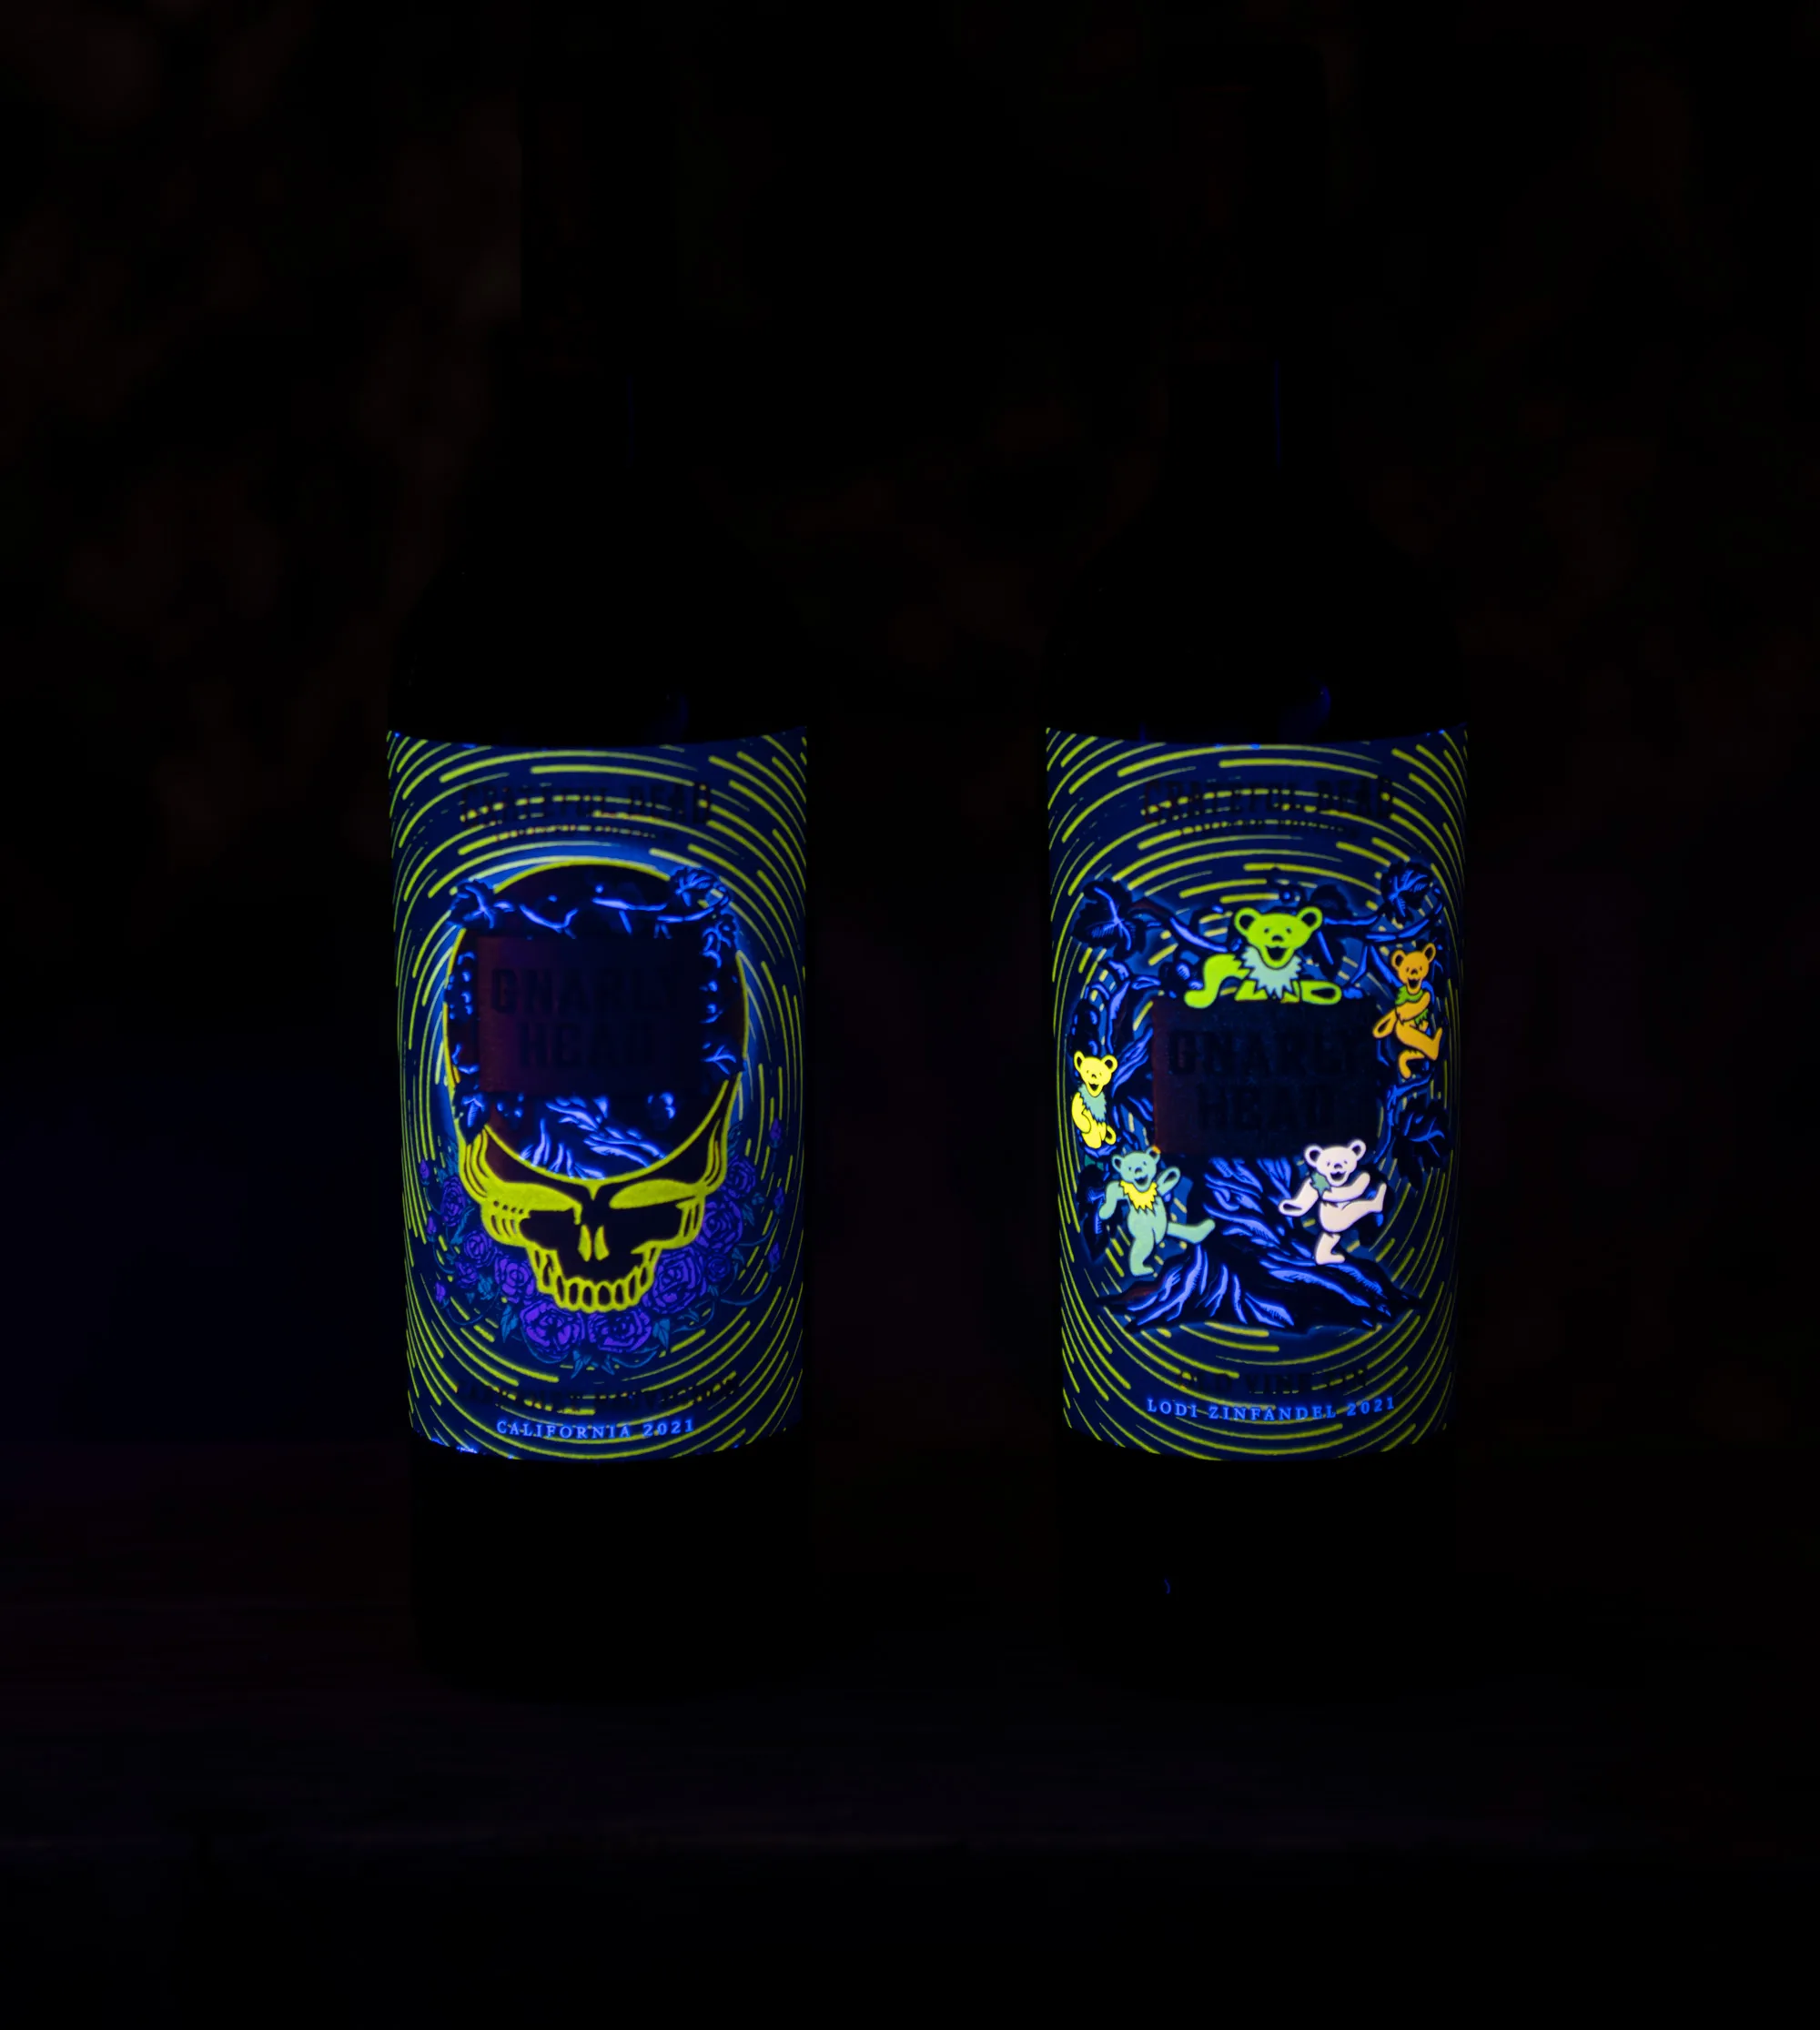 Glow in the dark Grateful Dead wine lables from Gnarly Head wines